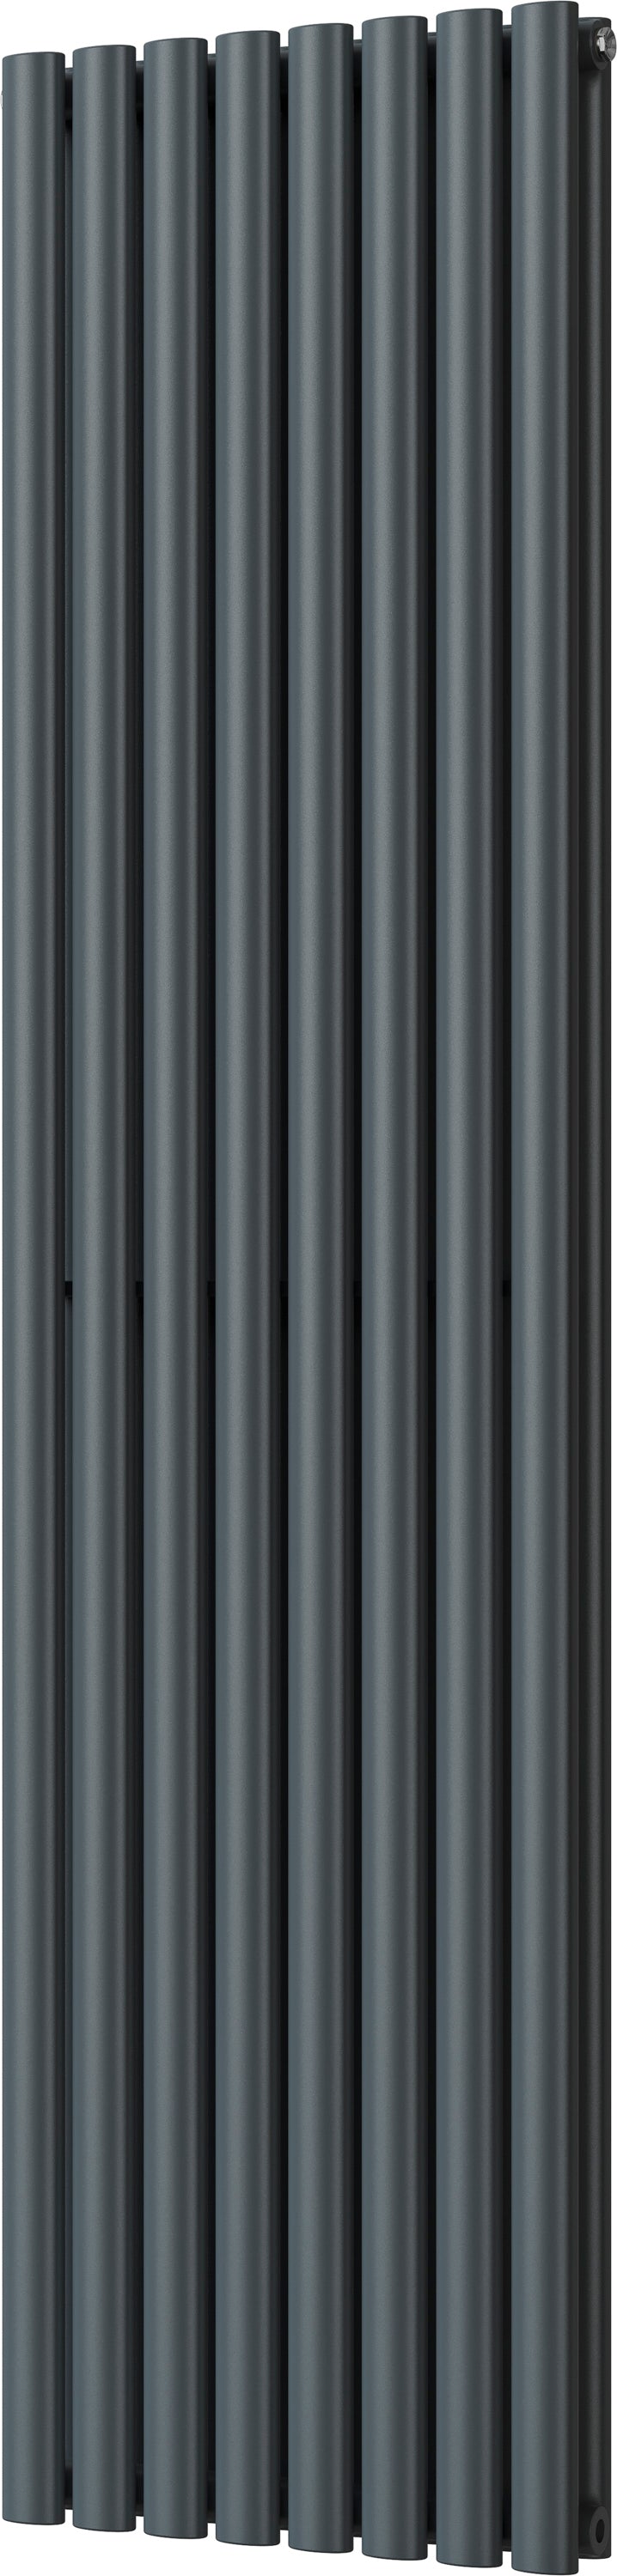 Omeara - Anthracite Vertical Radiator H1800mm x W464mm Double Panel